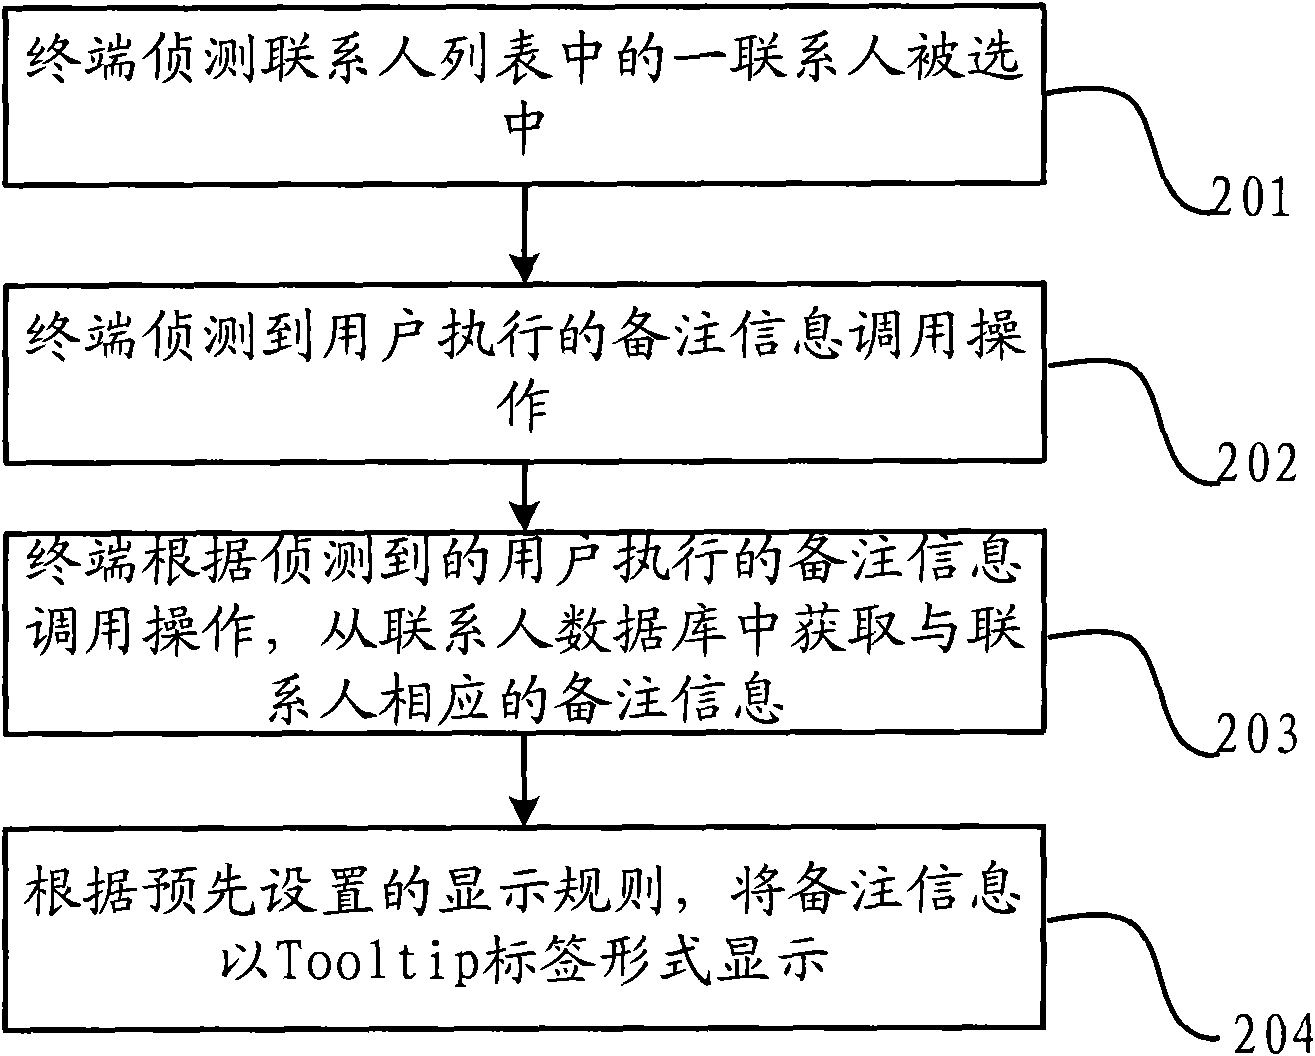 Display method and system for note information in contact list